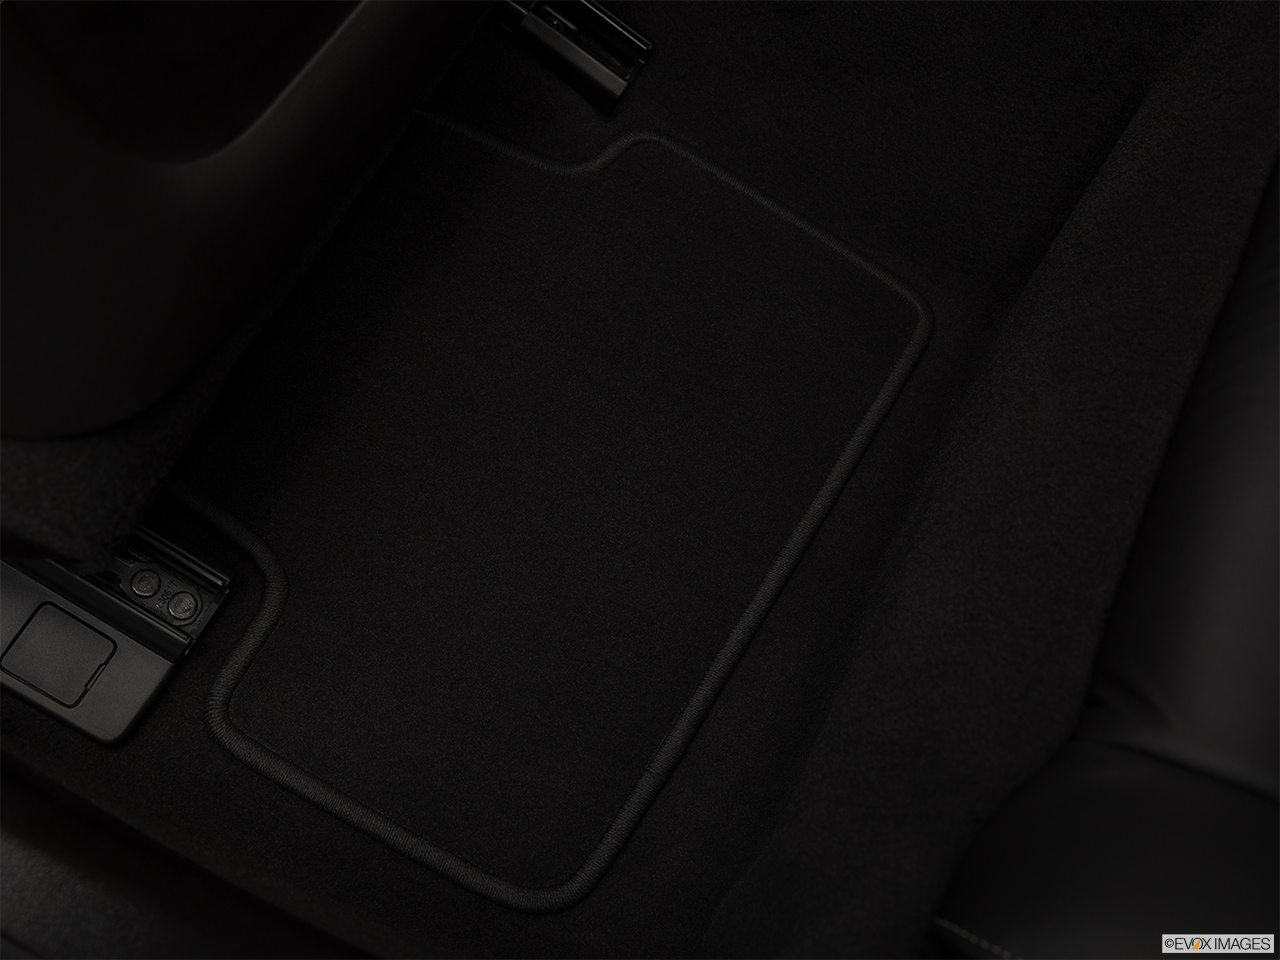 2019 Cadillac ATS Luxury Rear driver's side floor mat. Mid-seat level from outside looking in. 